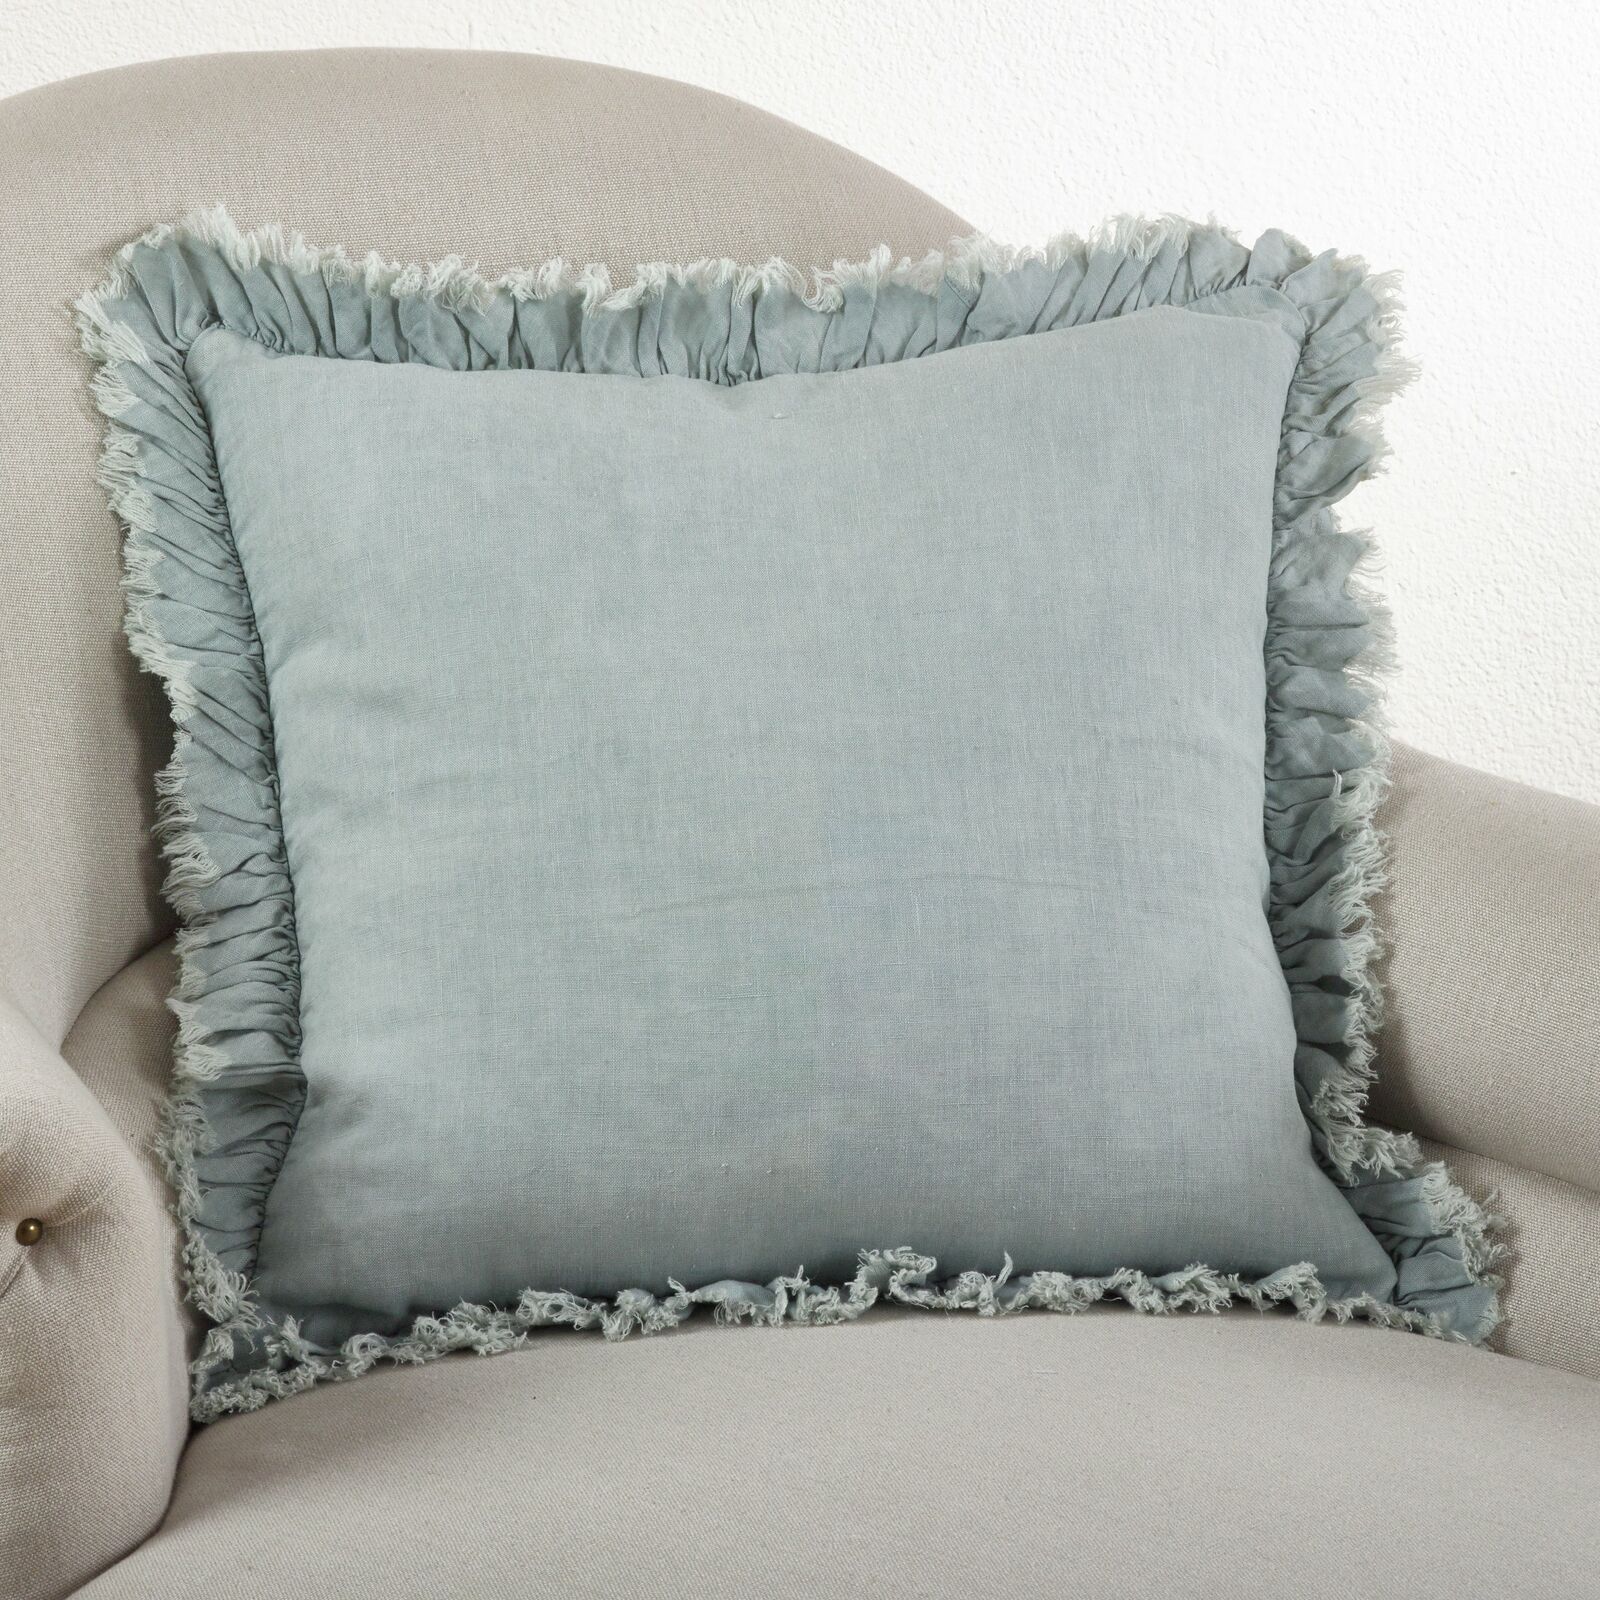 https://www.saltyhome.com/wp-content/uploads/2020/11/Blue-Grey-saro-down-duck-feather-filled-ruffled-throw-linen-removable-insert-pillow-s-l1600.jpg